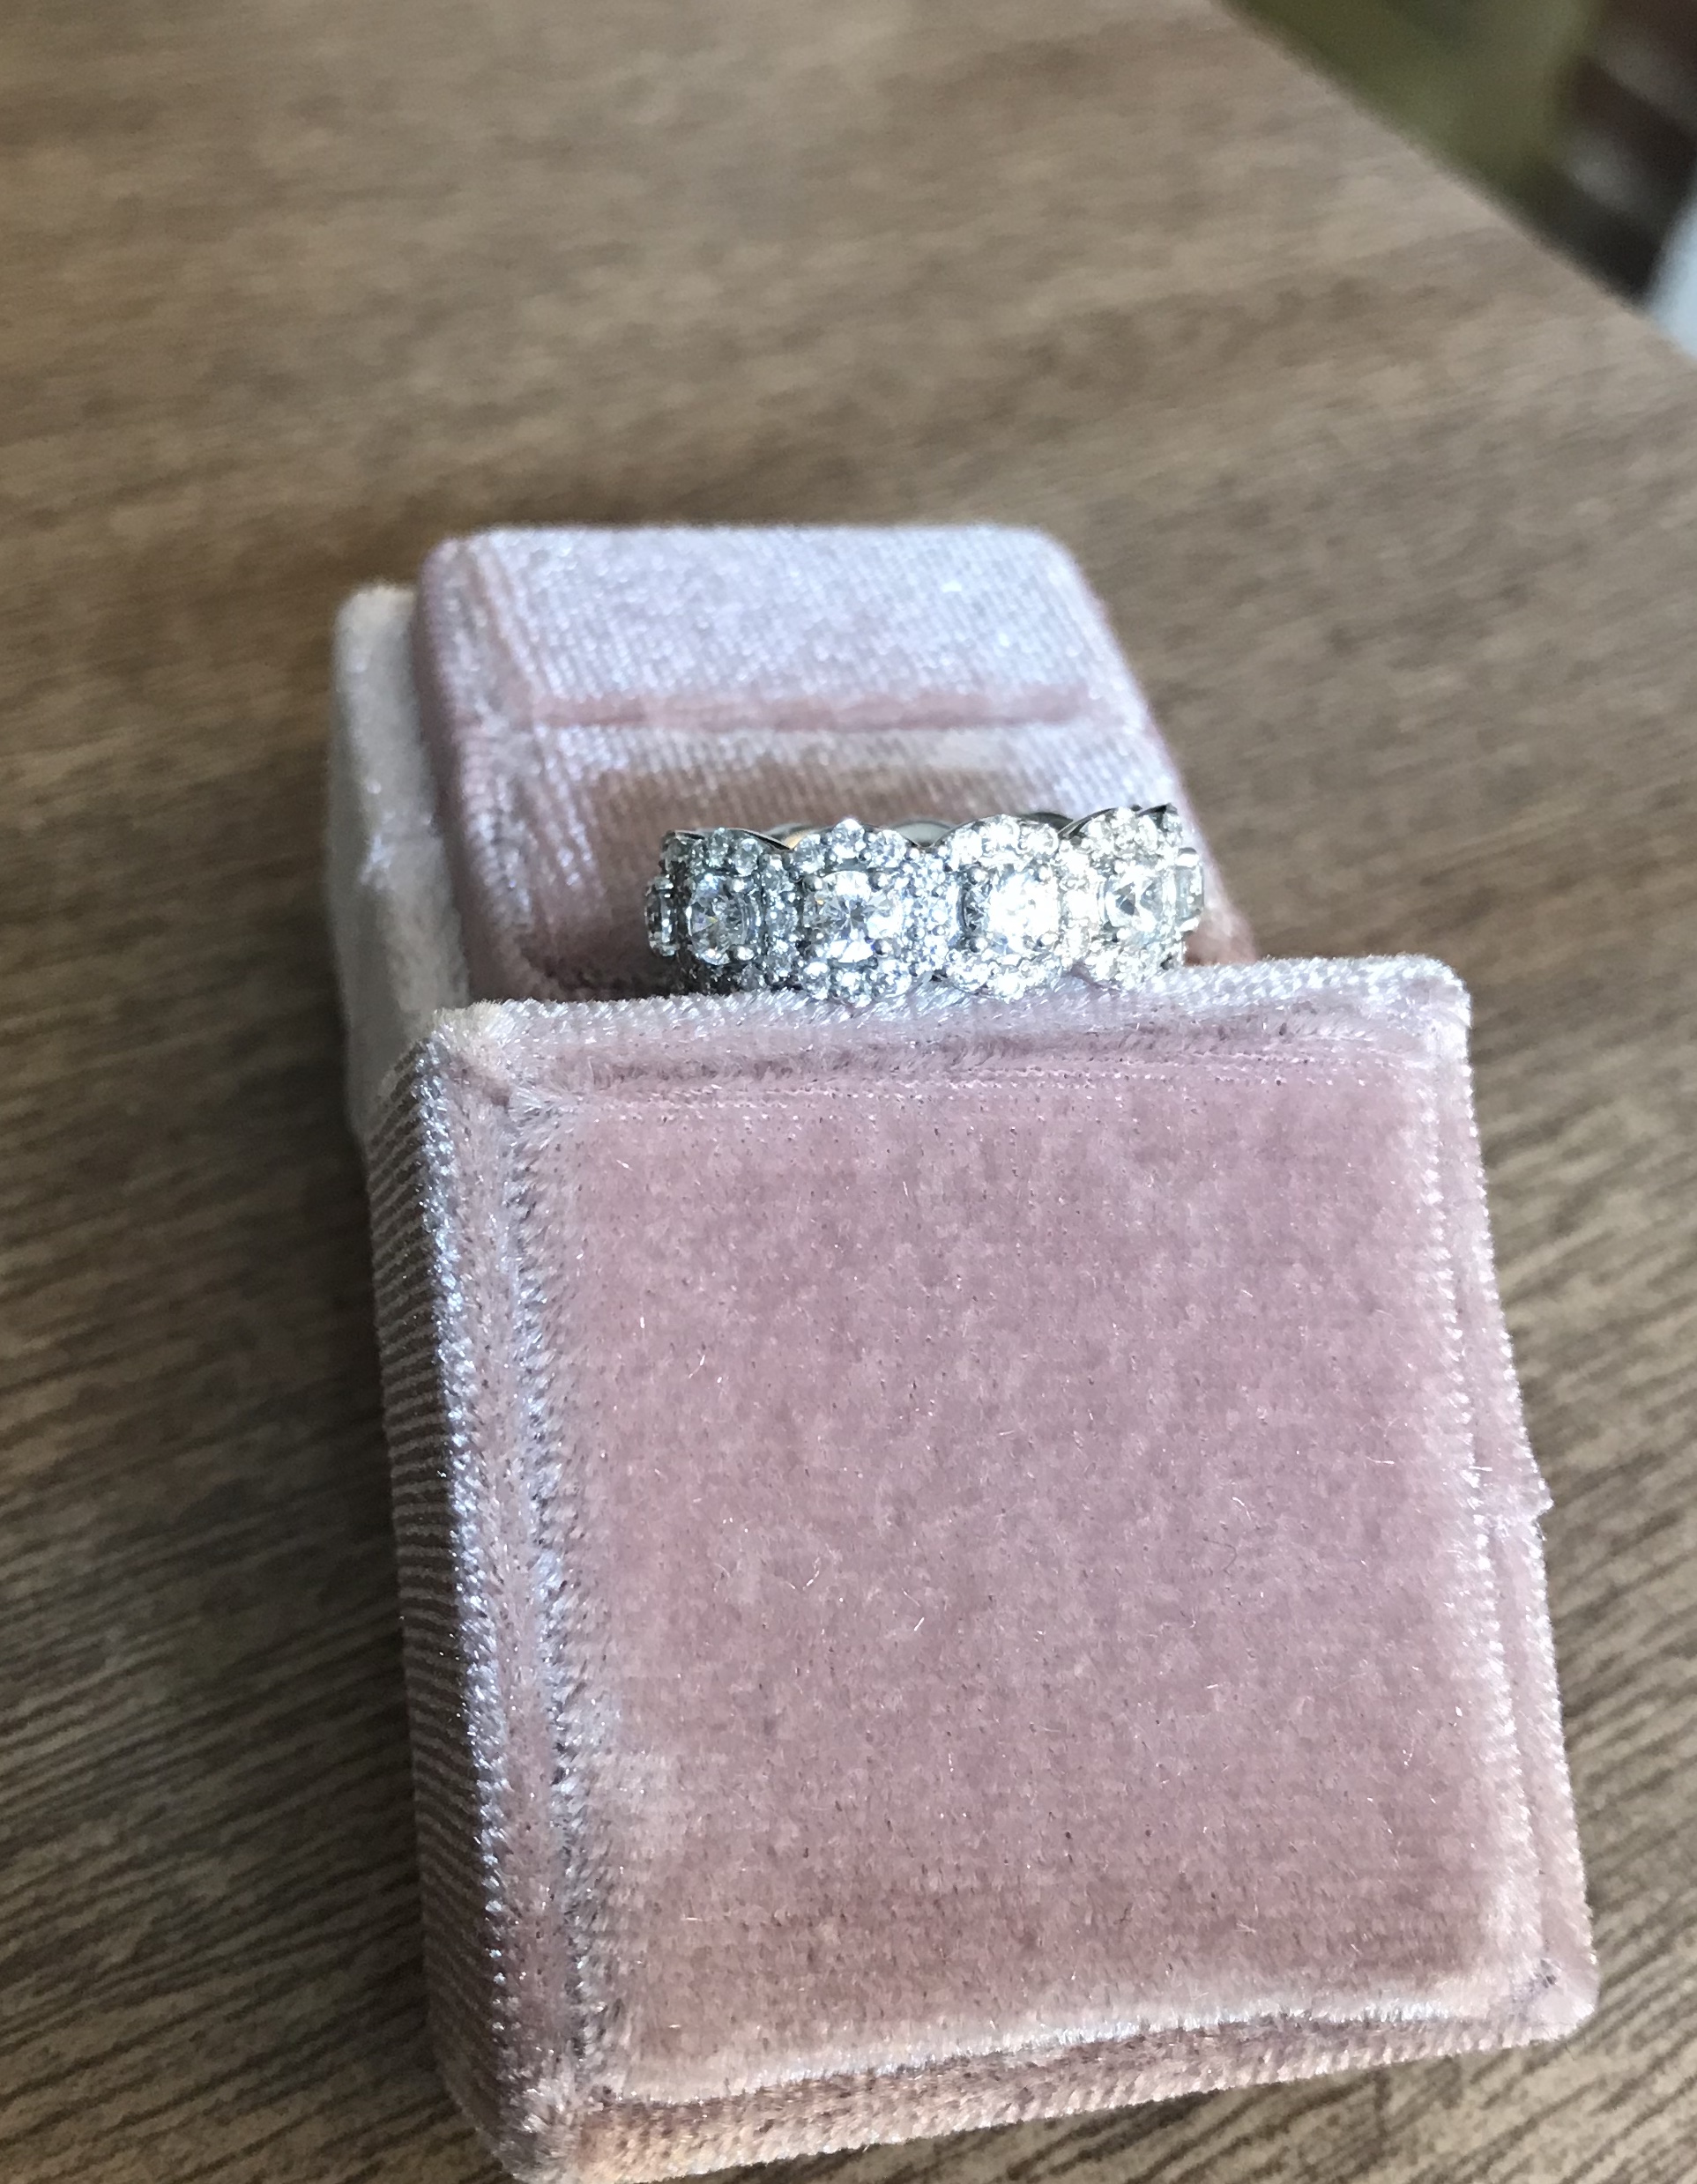 Anjolee Diamond Ring Review